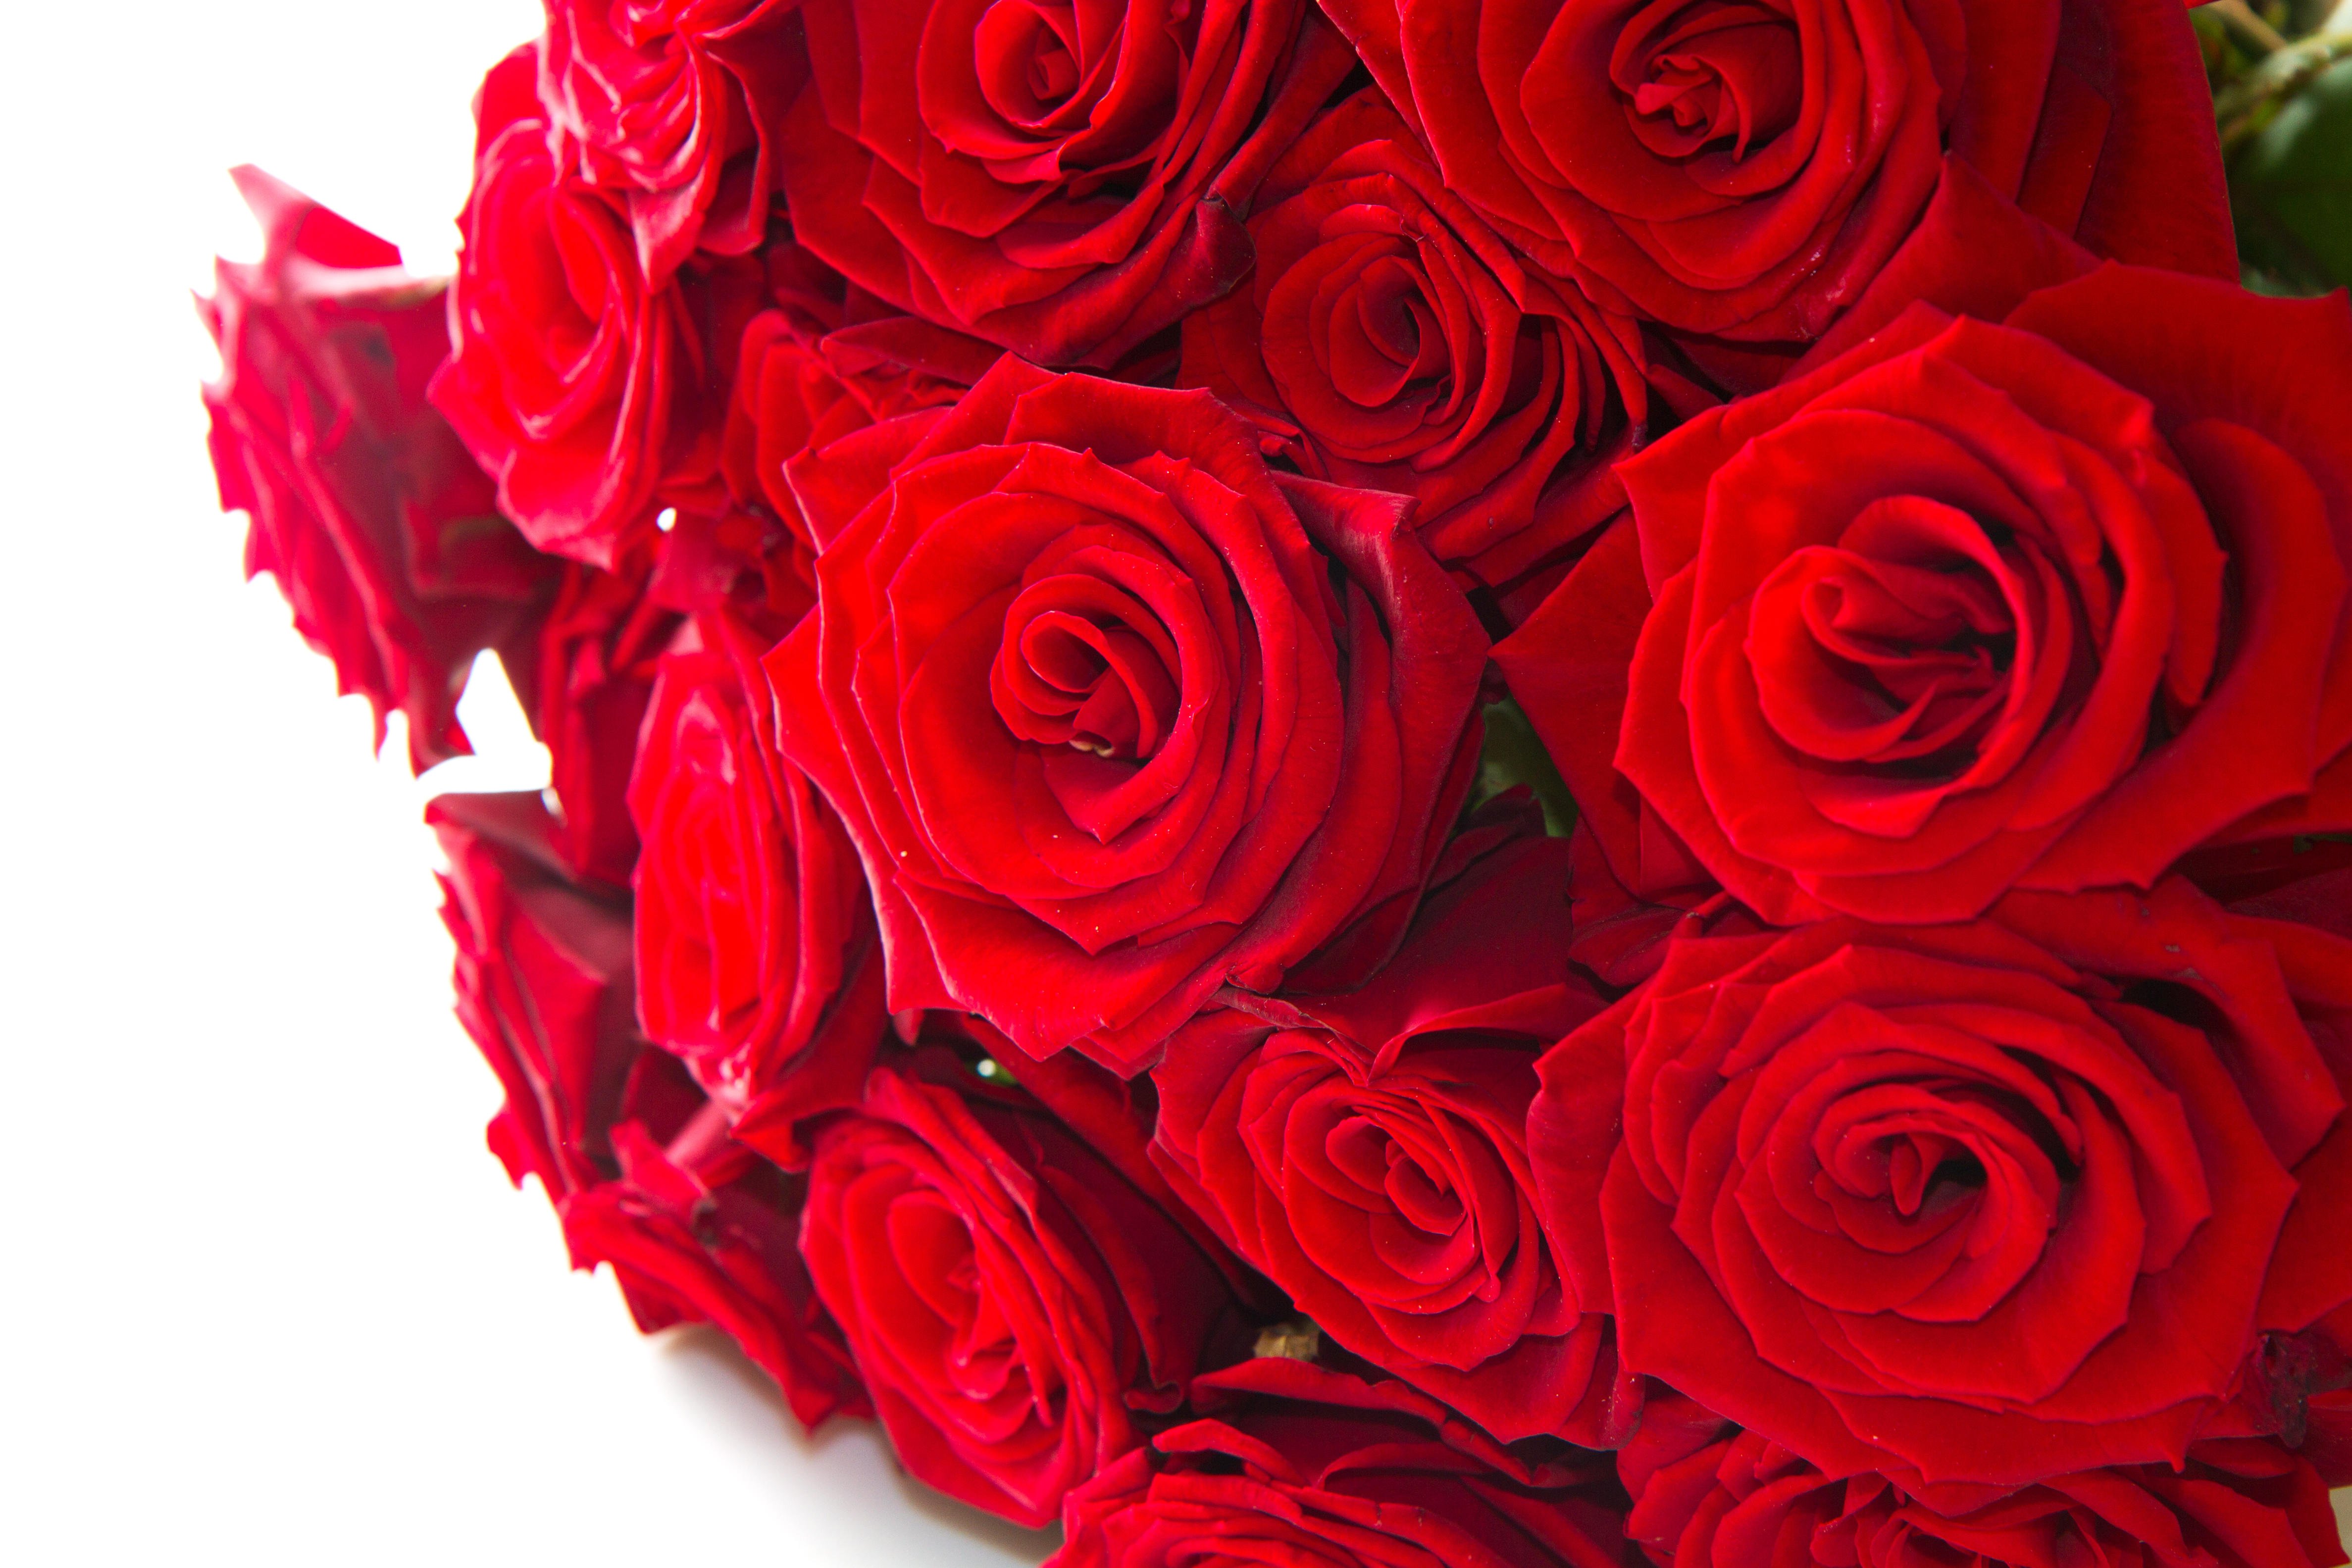 Wallpapers roses flowers red petals on the desktop